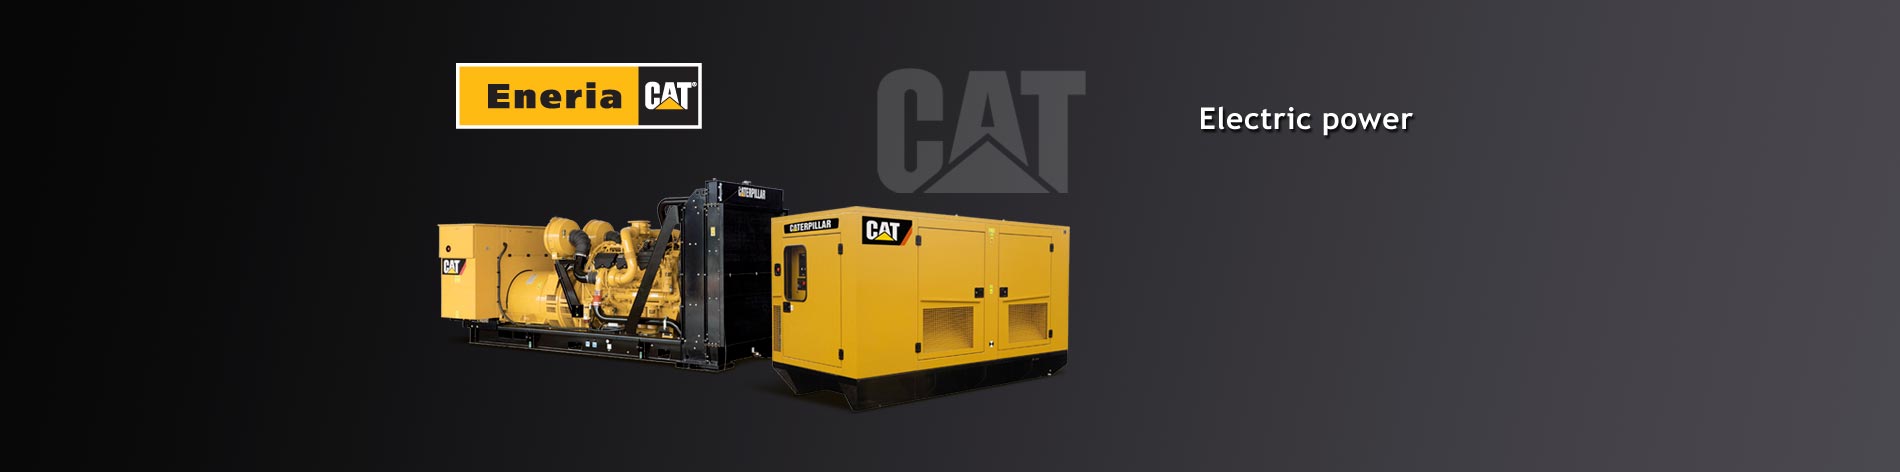 Whether stationary or mobile sets with outputs from 10 kW to 4,000 kW, we distribute and install Caterpillar generator sets in any configuration, whether containerised or in buildings, in any environment and climate around the world.